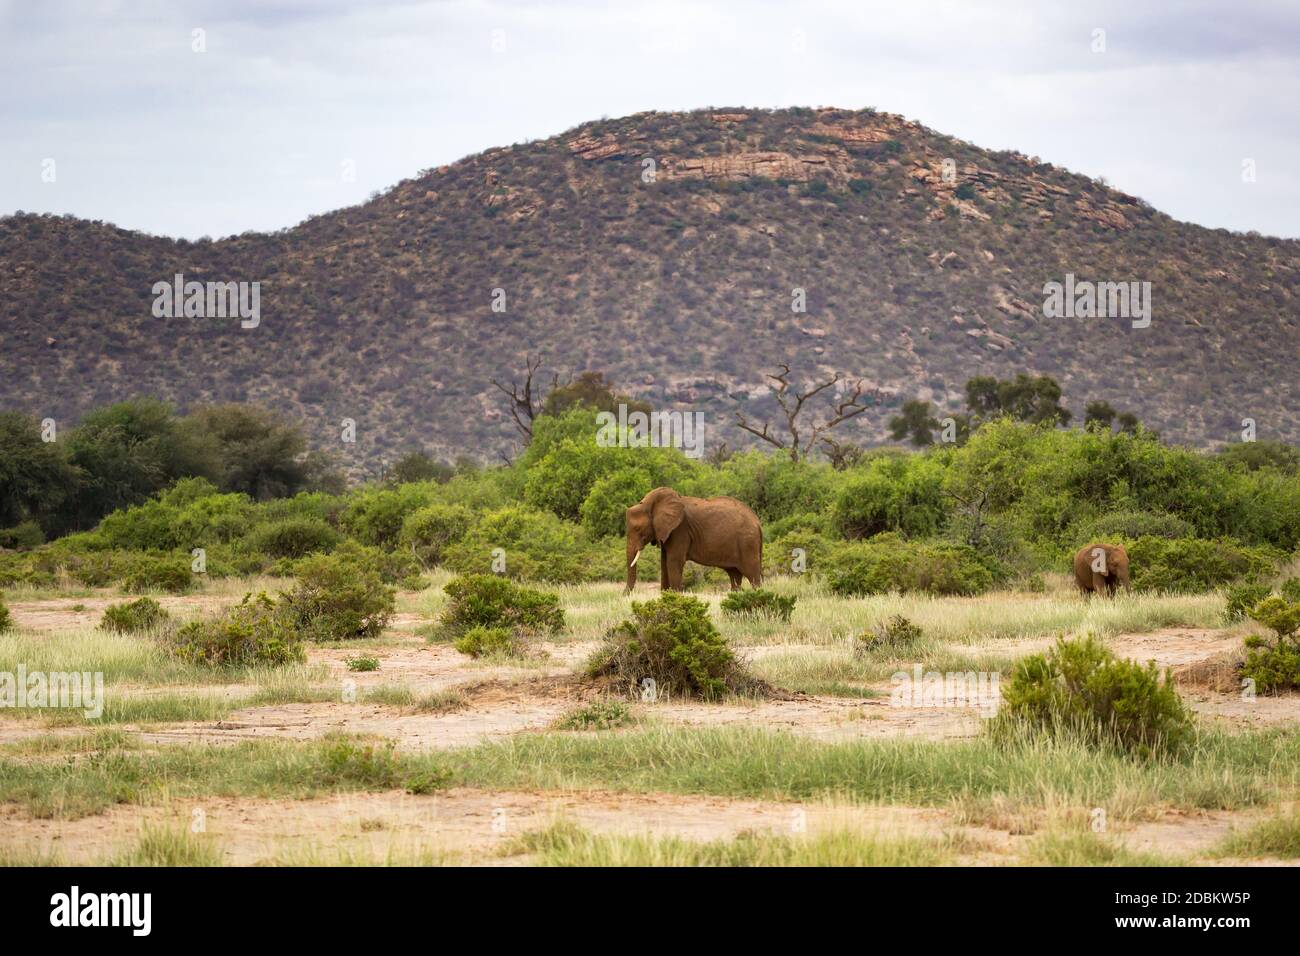 Some red elephants walking between the bush in front of a hill Stock Photo